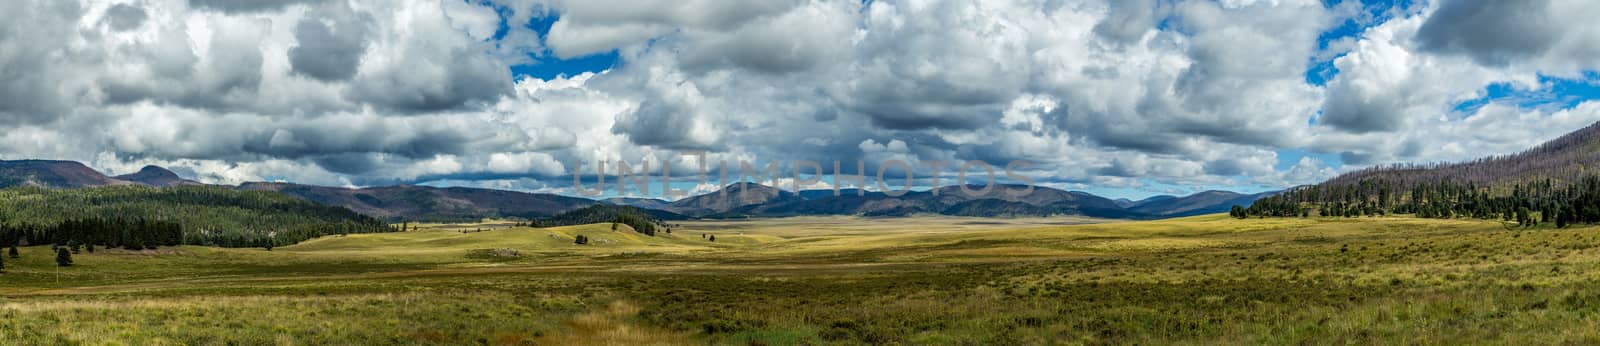 The Valles Caldera by adifferentbrian